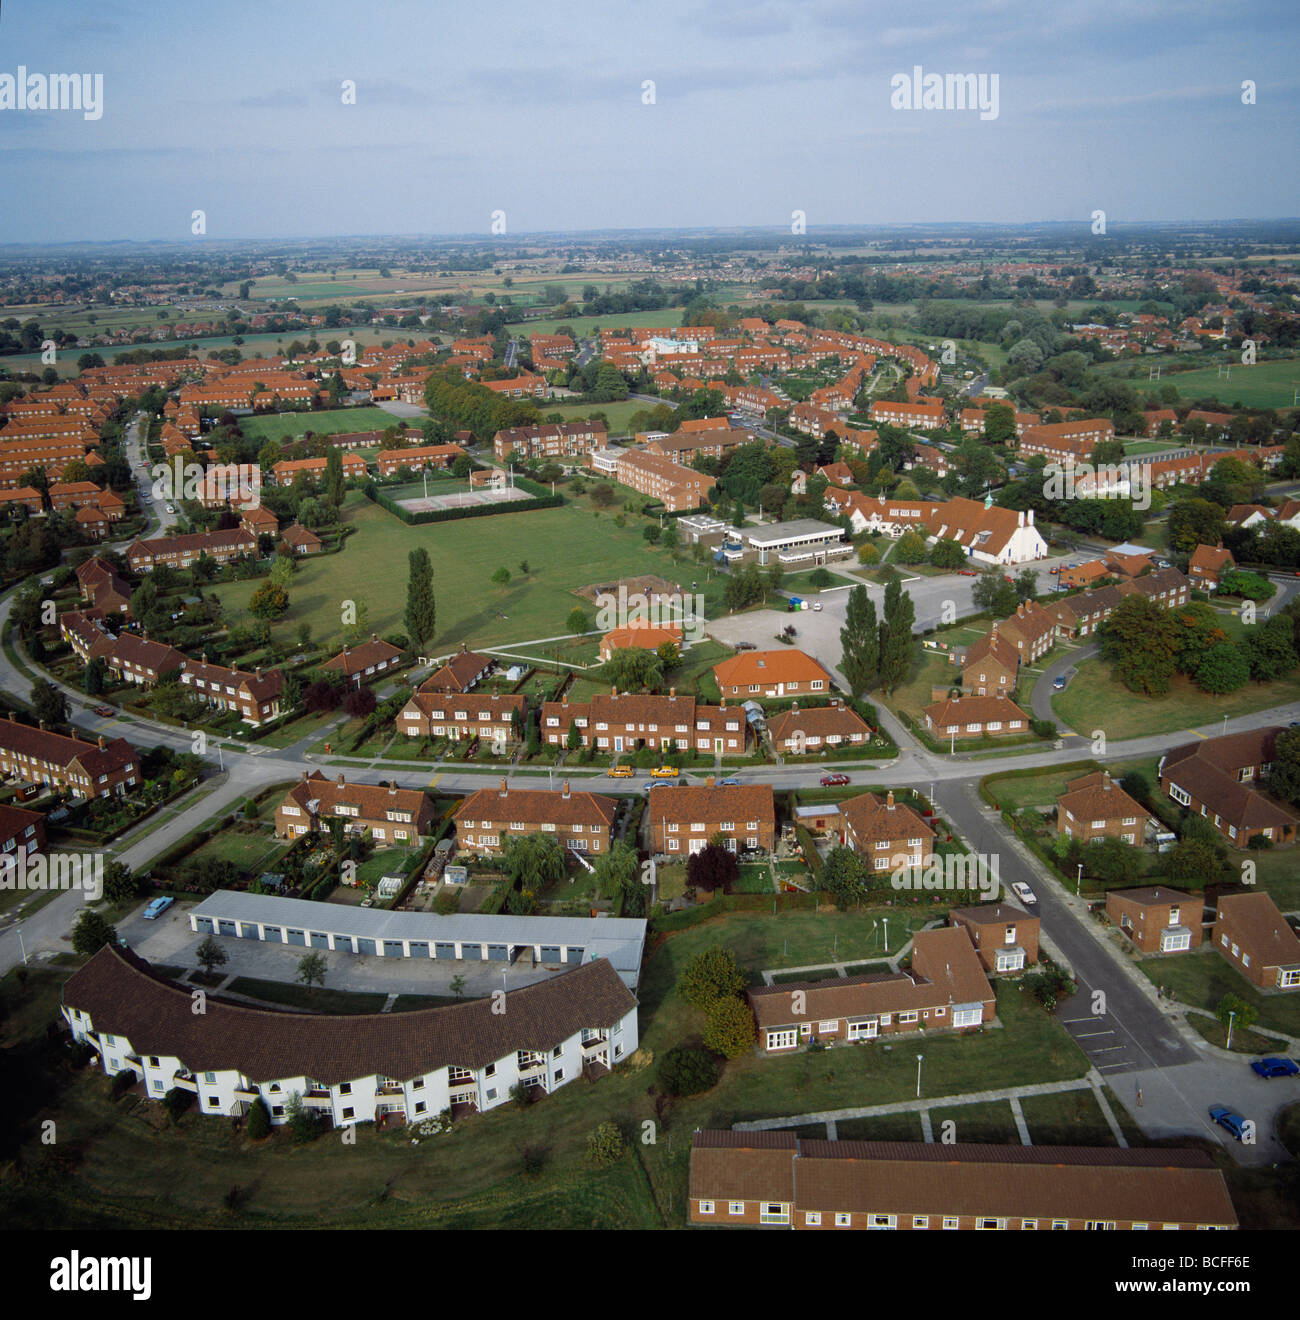 Semi detached housing at New Earswick Garden Village UK founded by philanthropist Joseph Rowntree aerial view Stock Photo